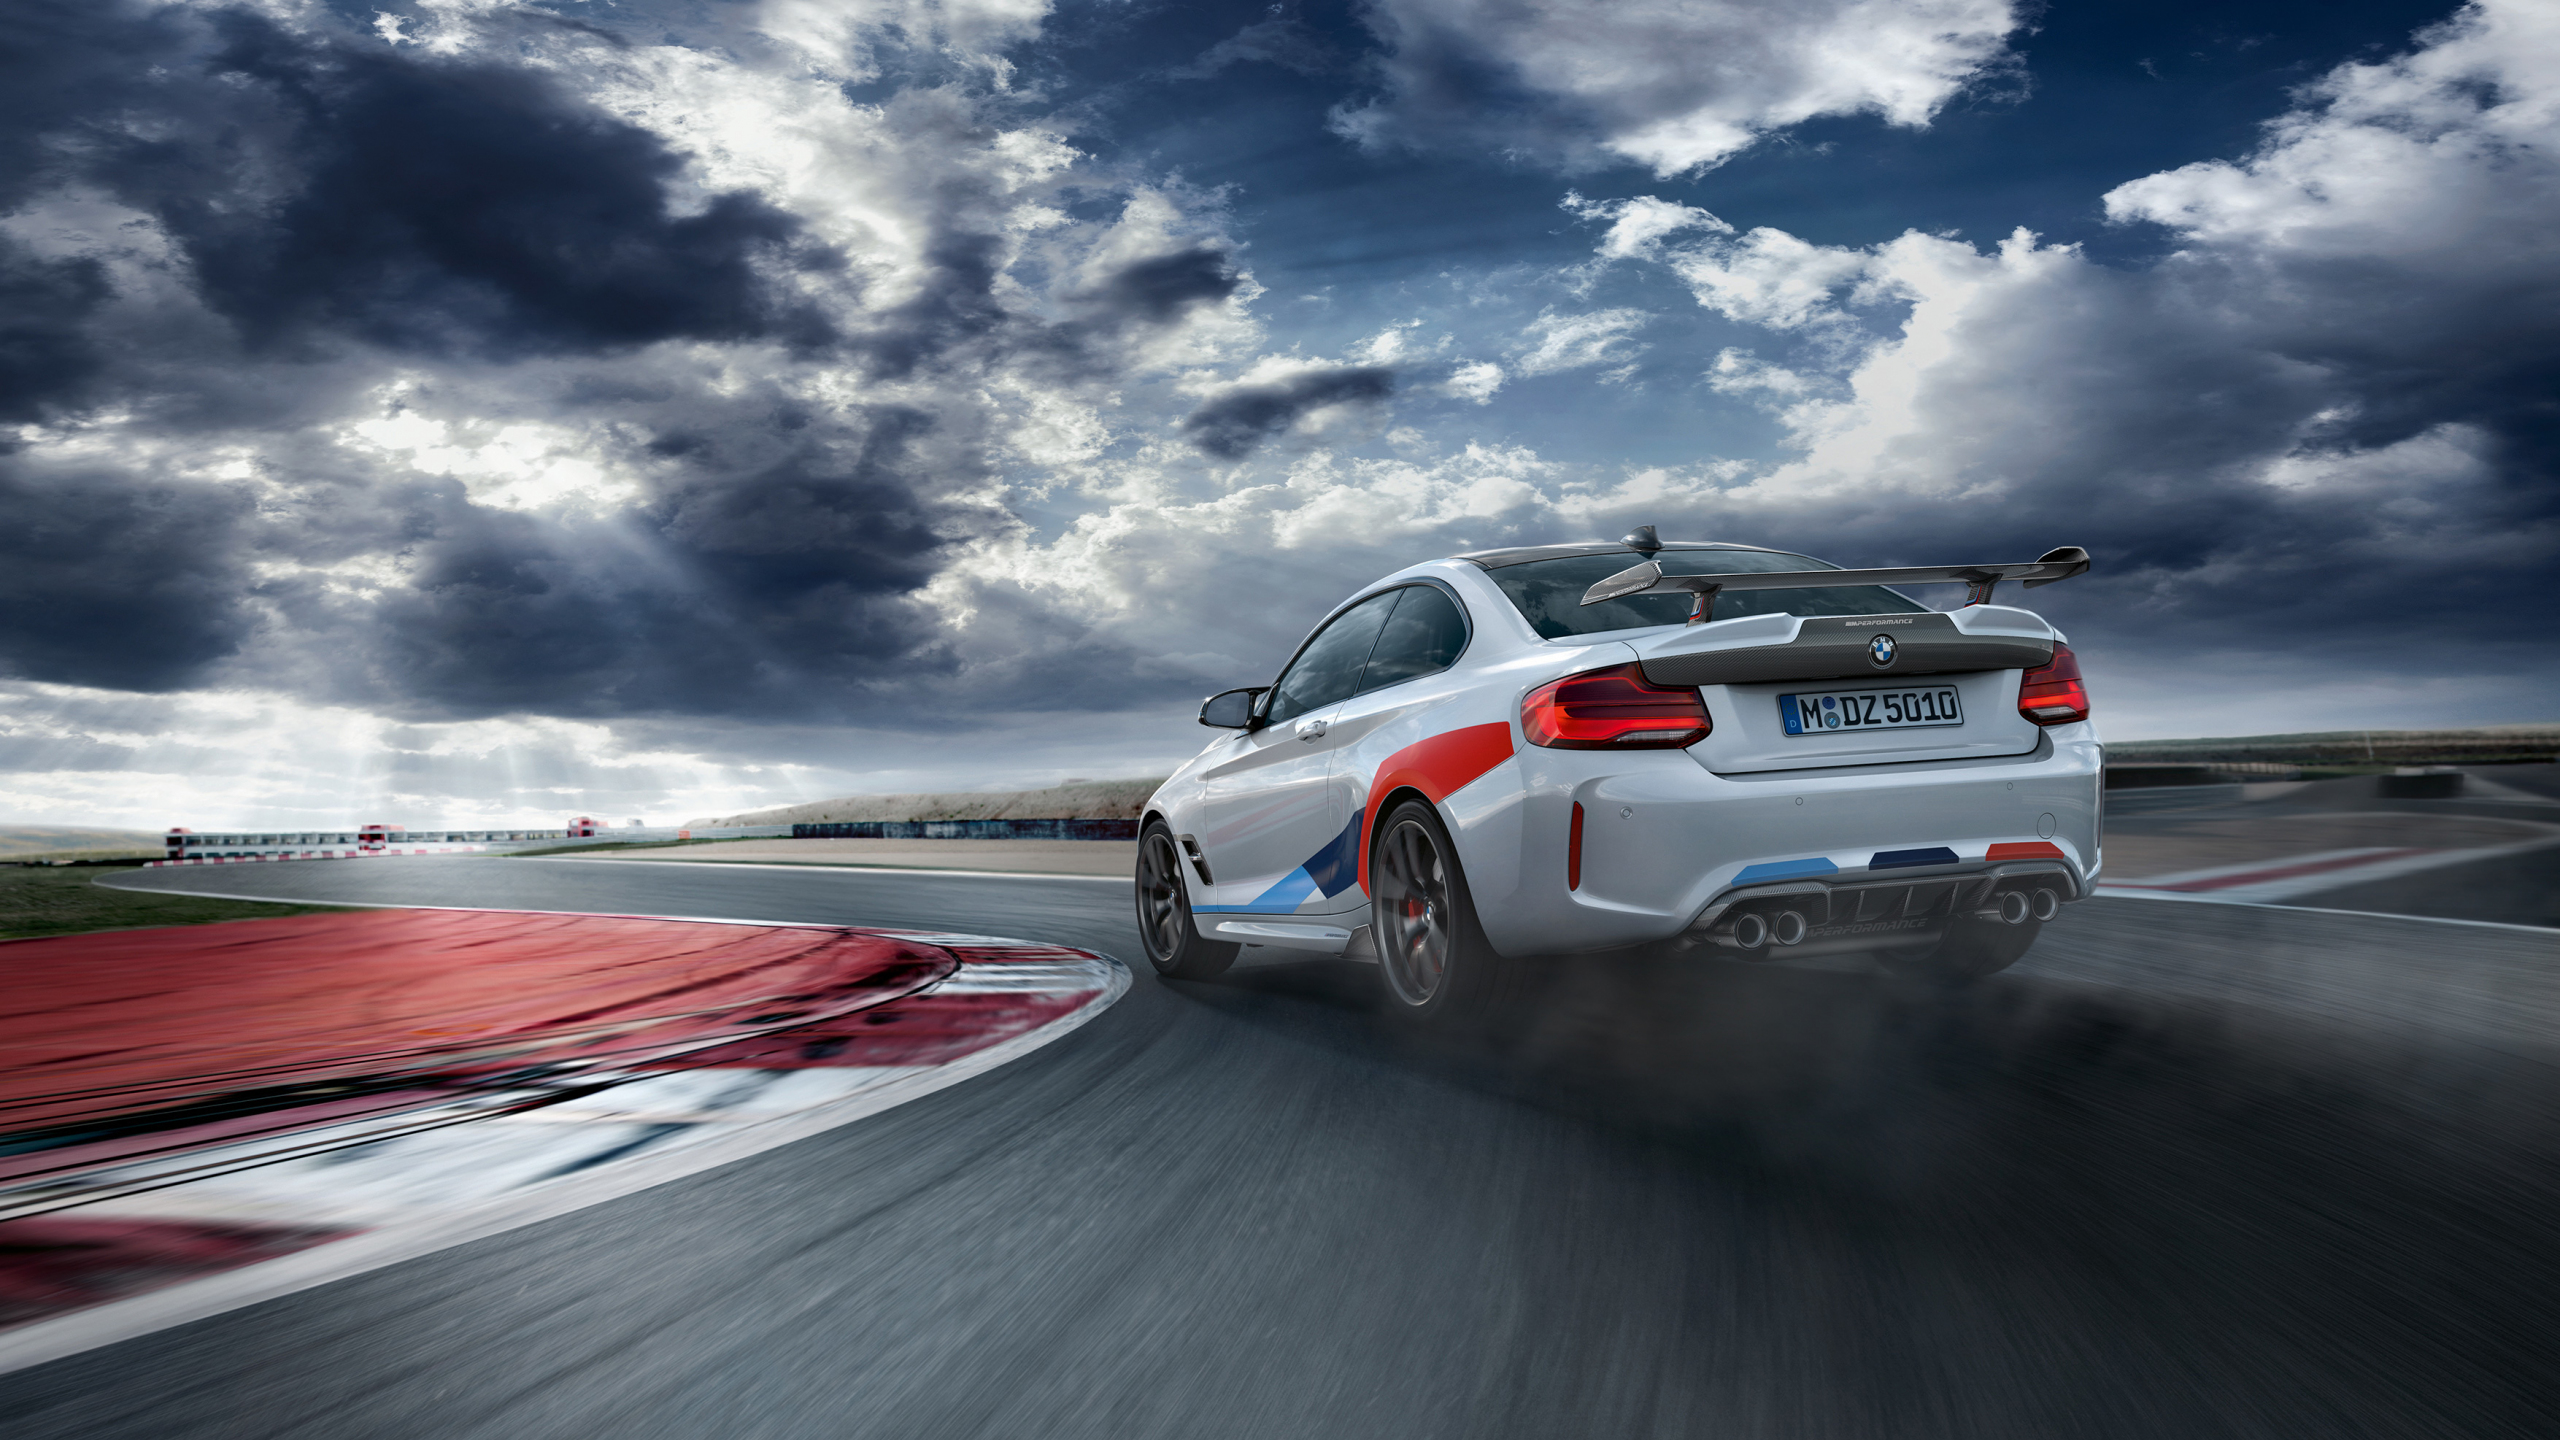 Download 2560x1440 Wallpaper Bmw M2 Competition M Performance 2018 Drift Race Track Dual Wide Widescreen 16 9 Widescreen 2560x1440 Hd Image Background 7286